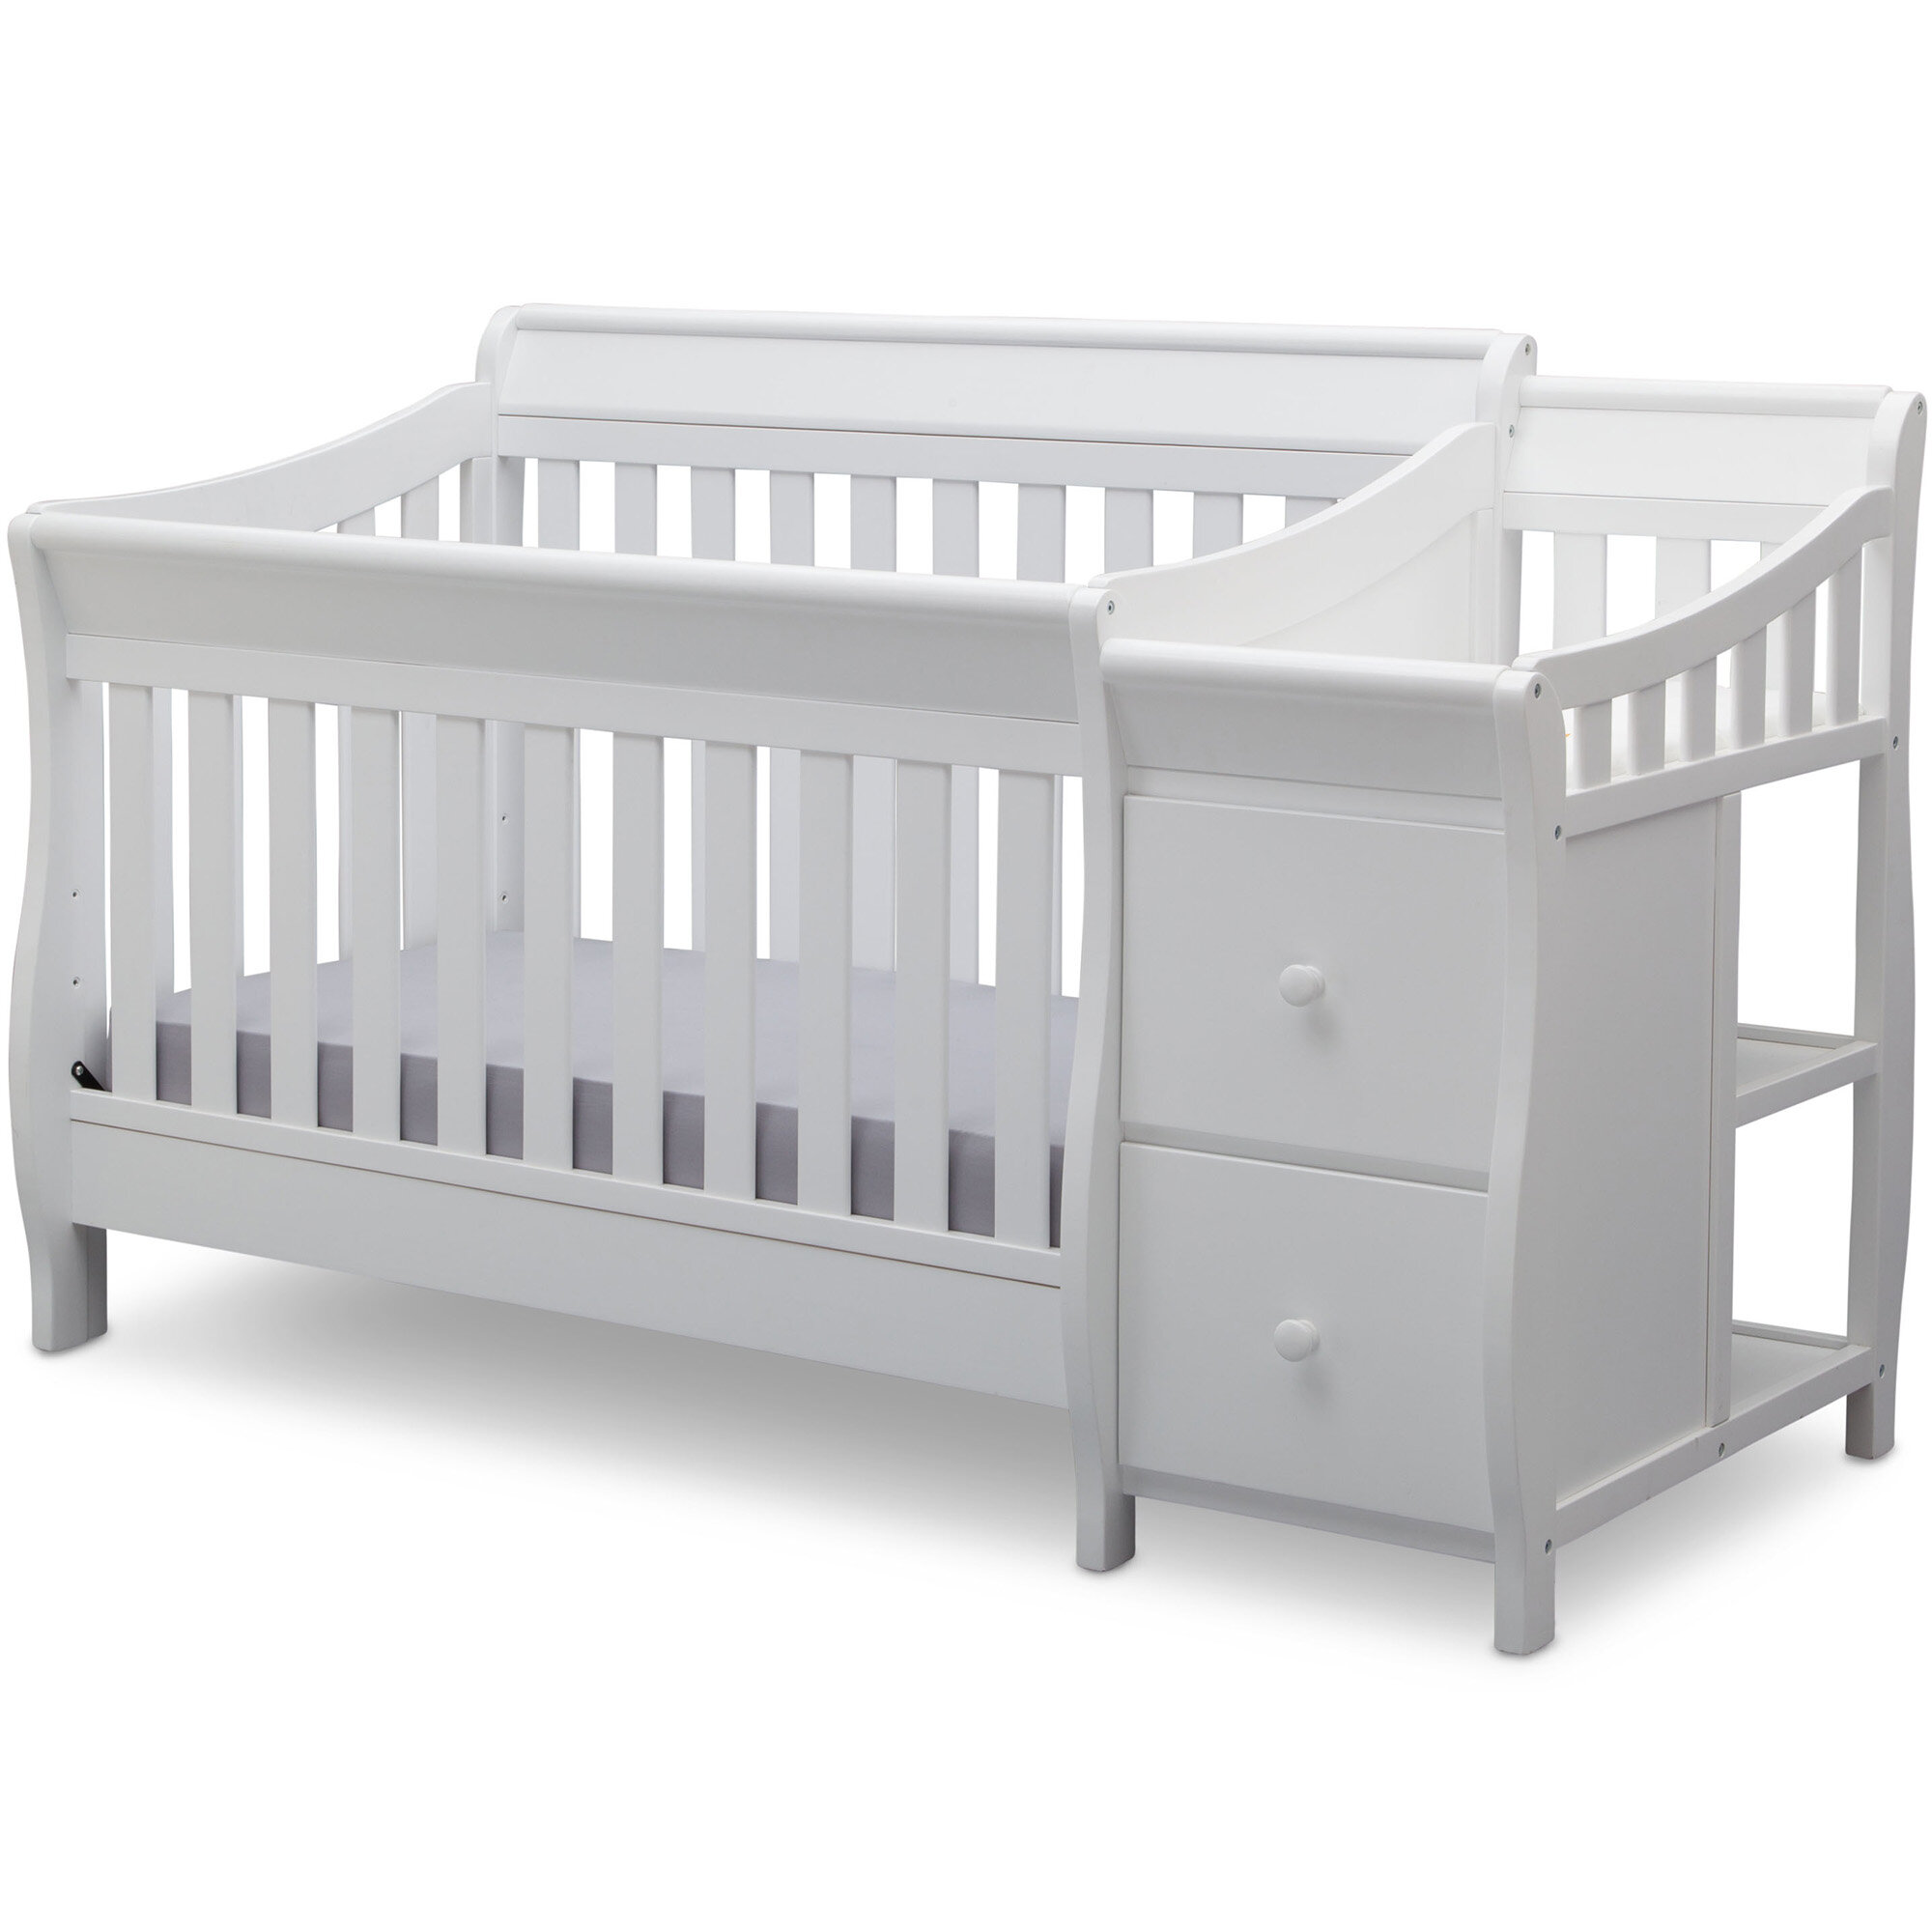 4 in one crib